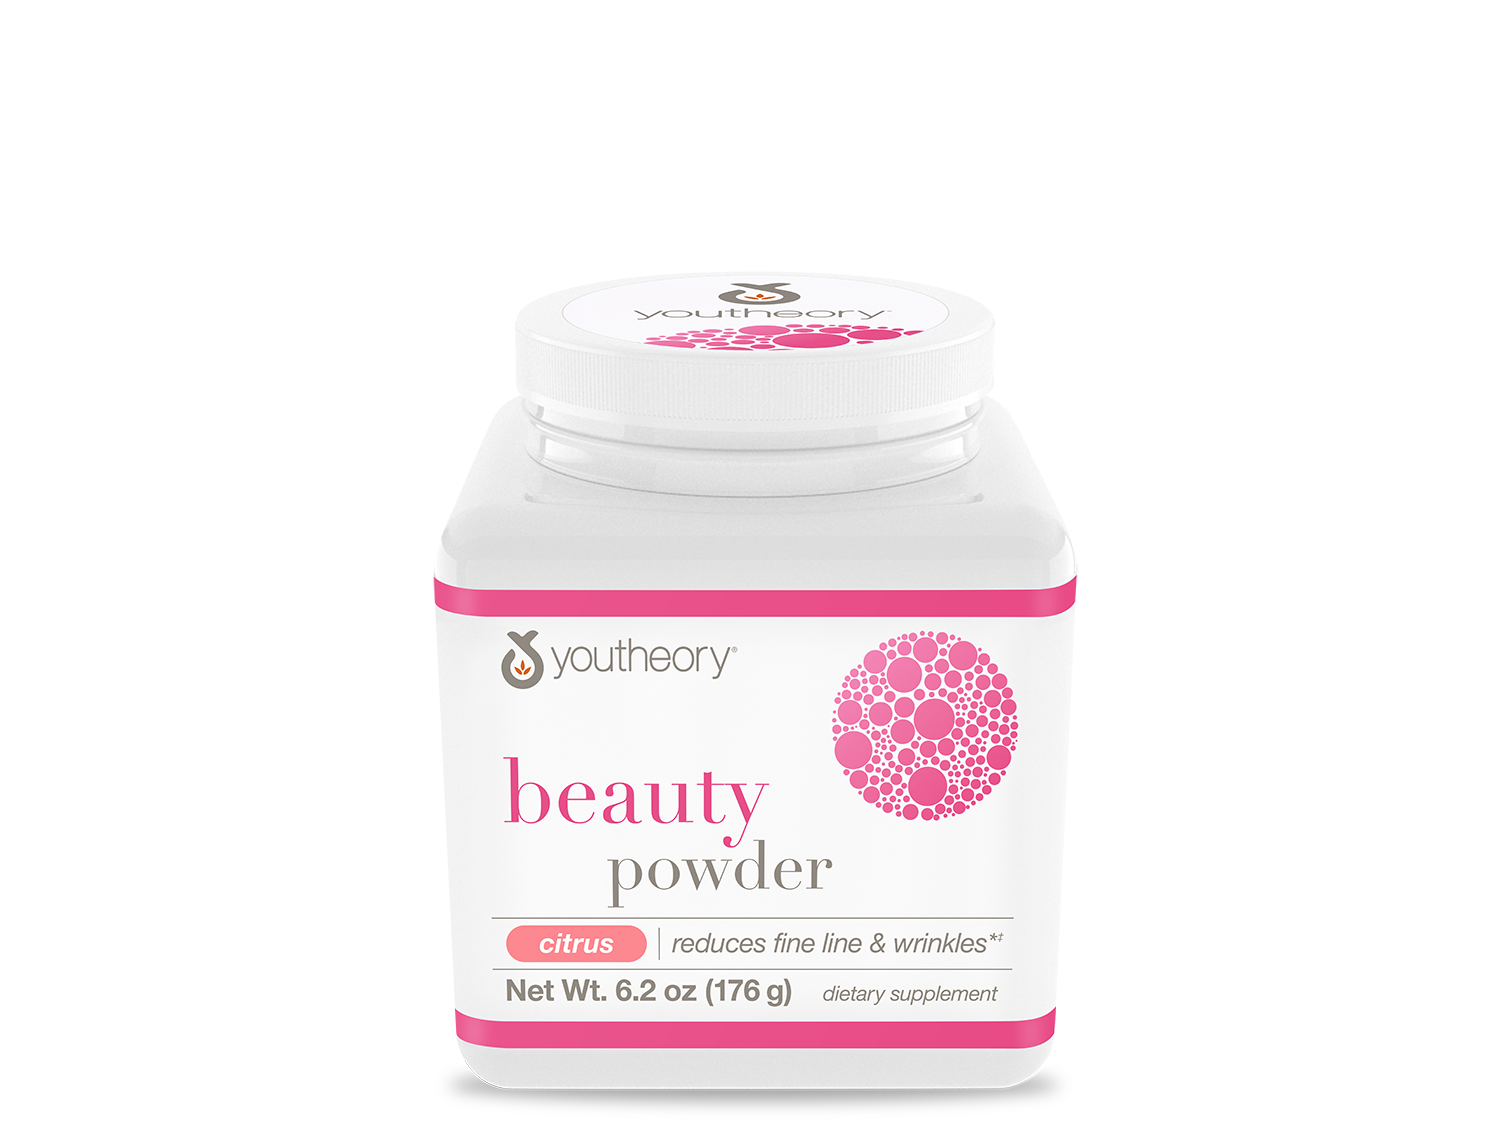 242232 6.2 Oz Beauty Powder To Support Healthy Collagen Production, Citrus